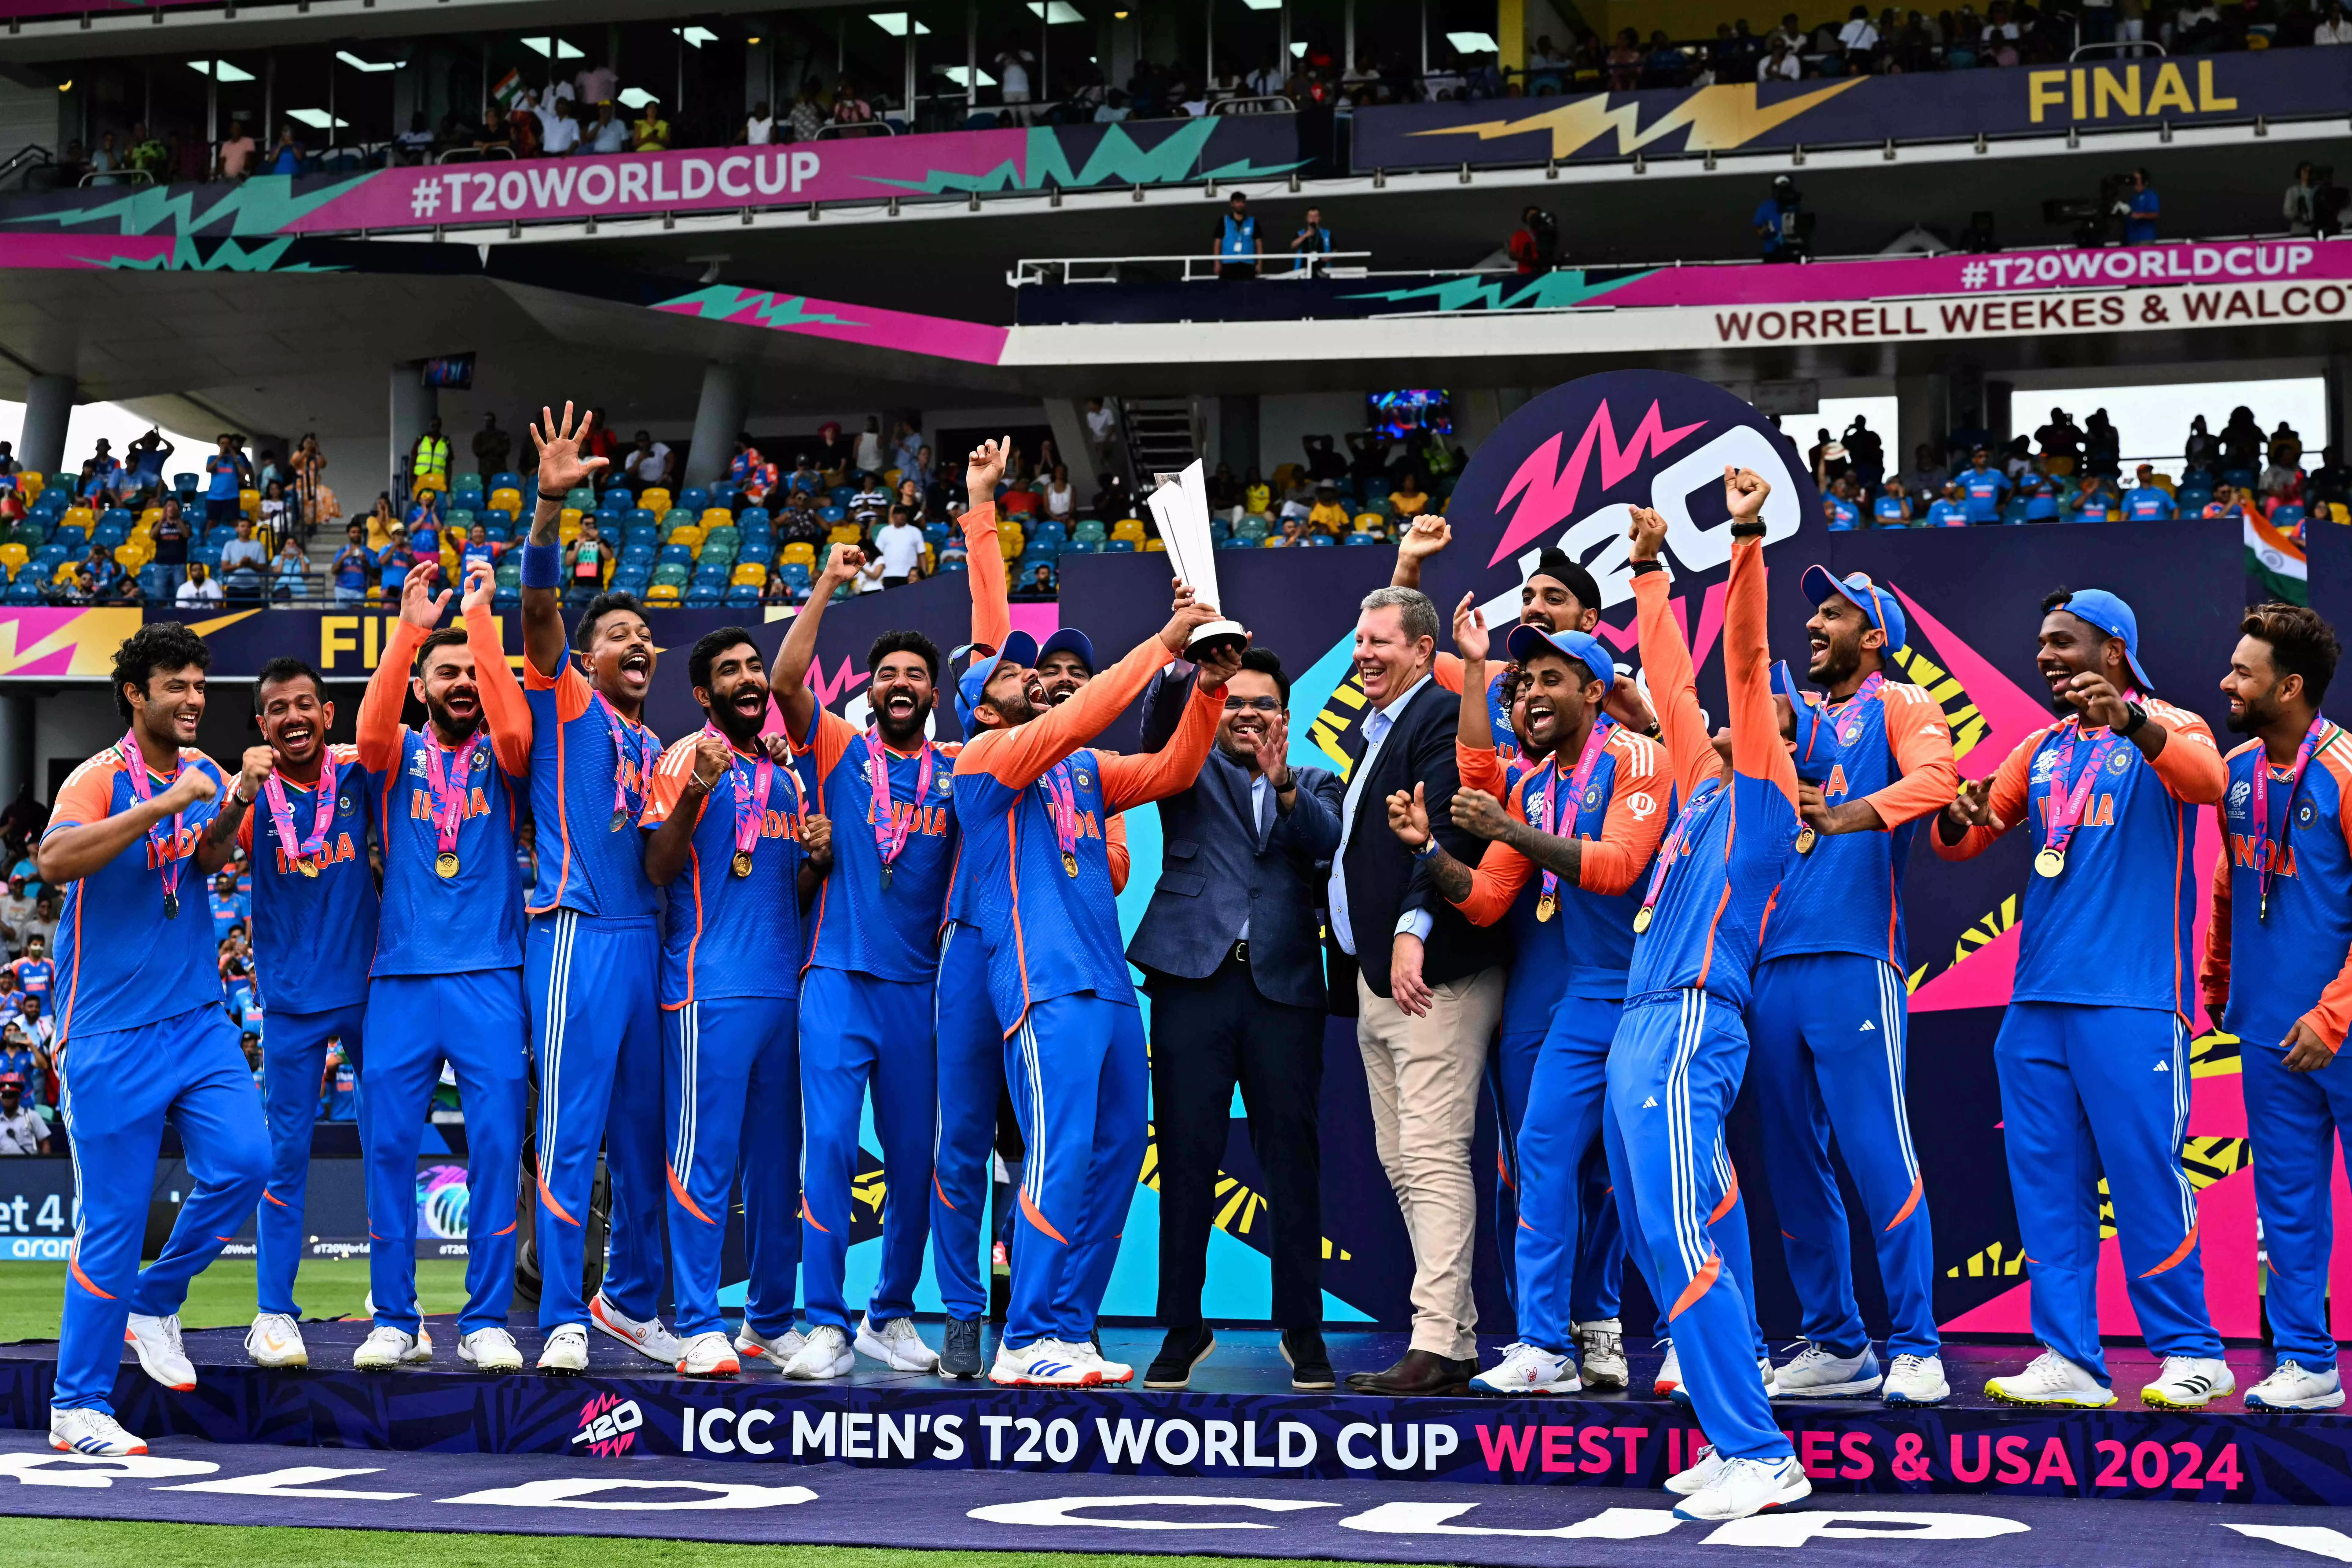 T20 World Cup-winning Indian cricket teams departure from Barbados delayed